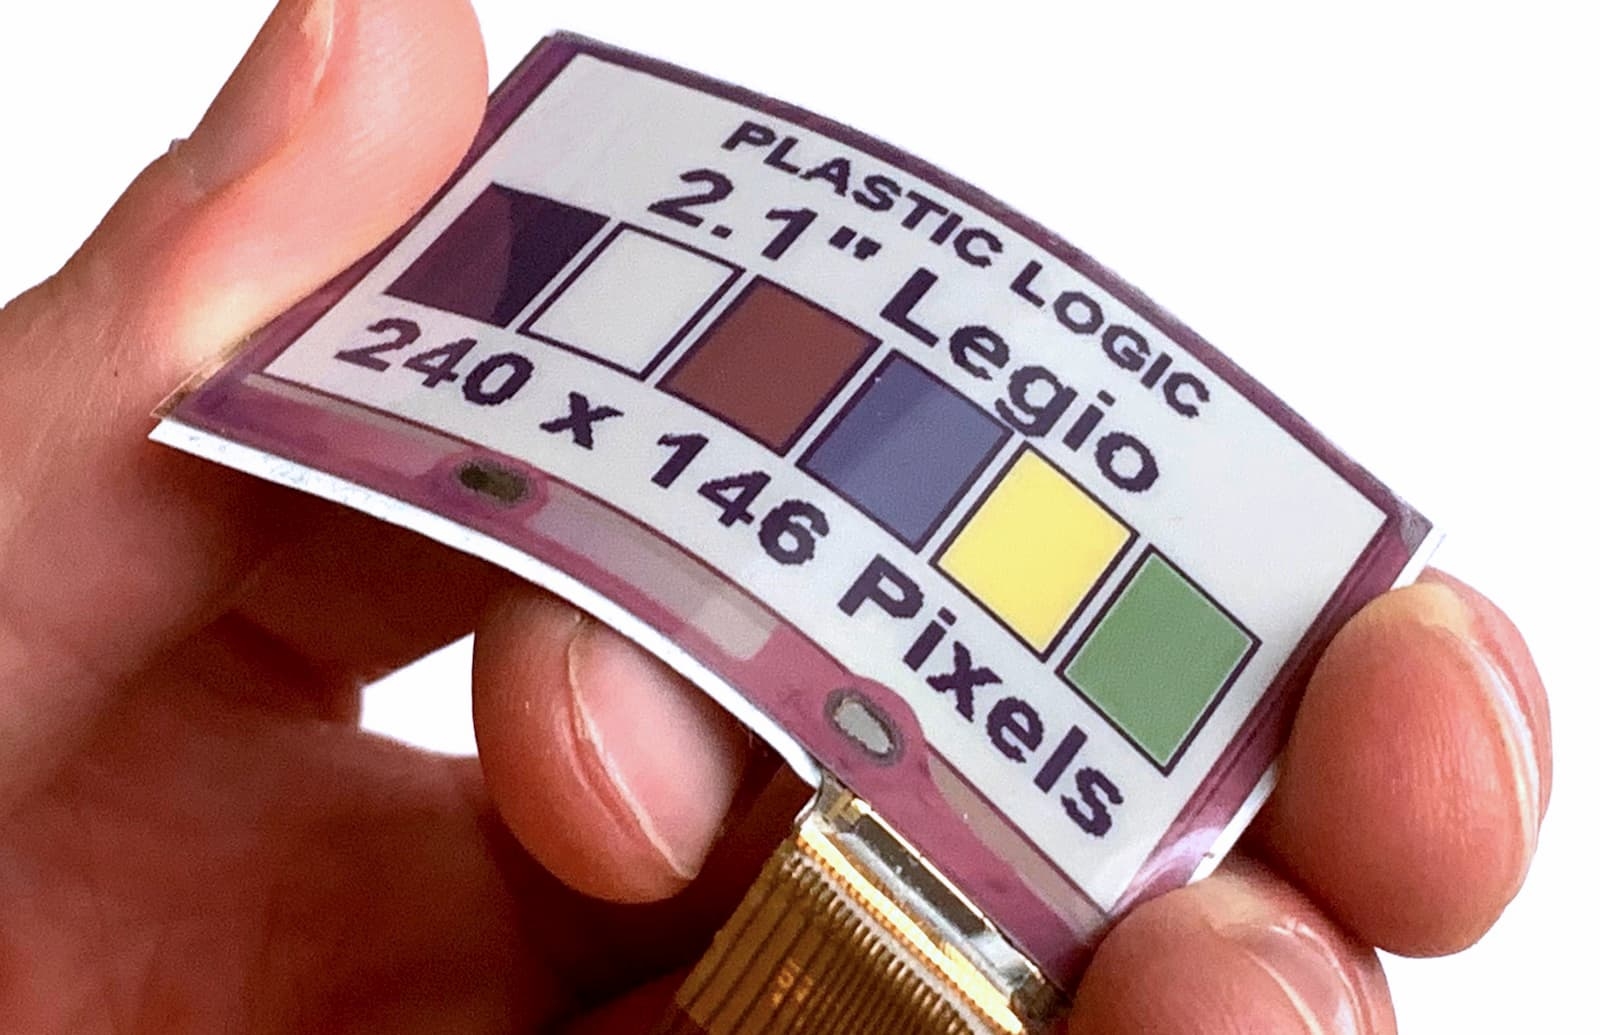 Flexible color ePaper displays could soon adorn your clothes | DeviceDaily.com